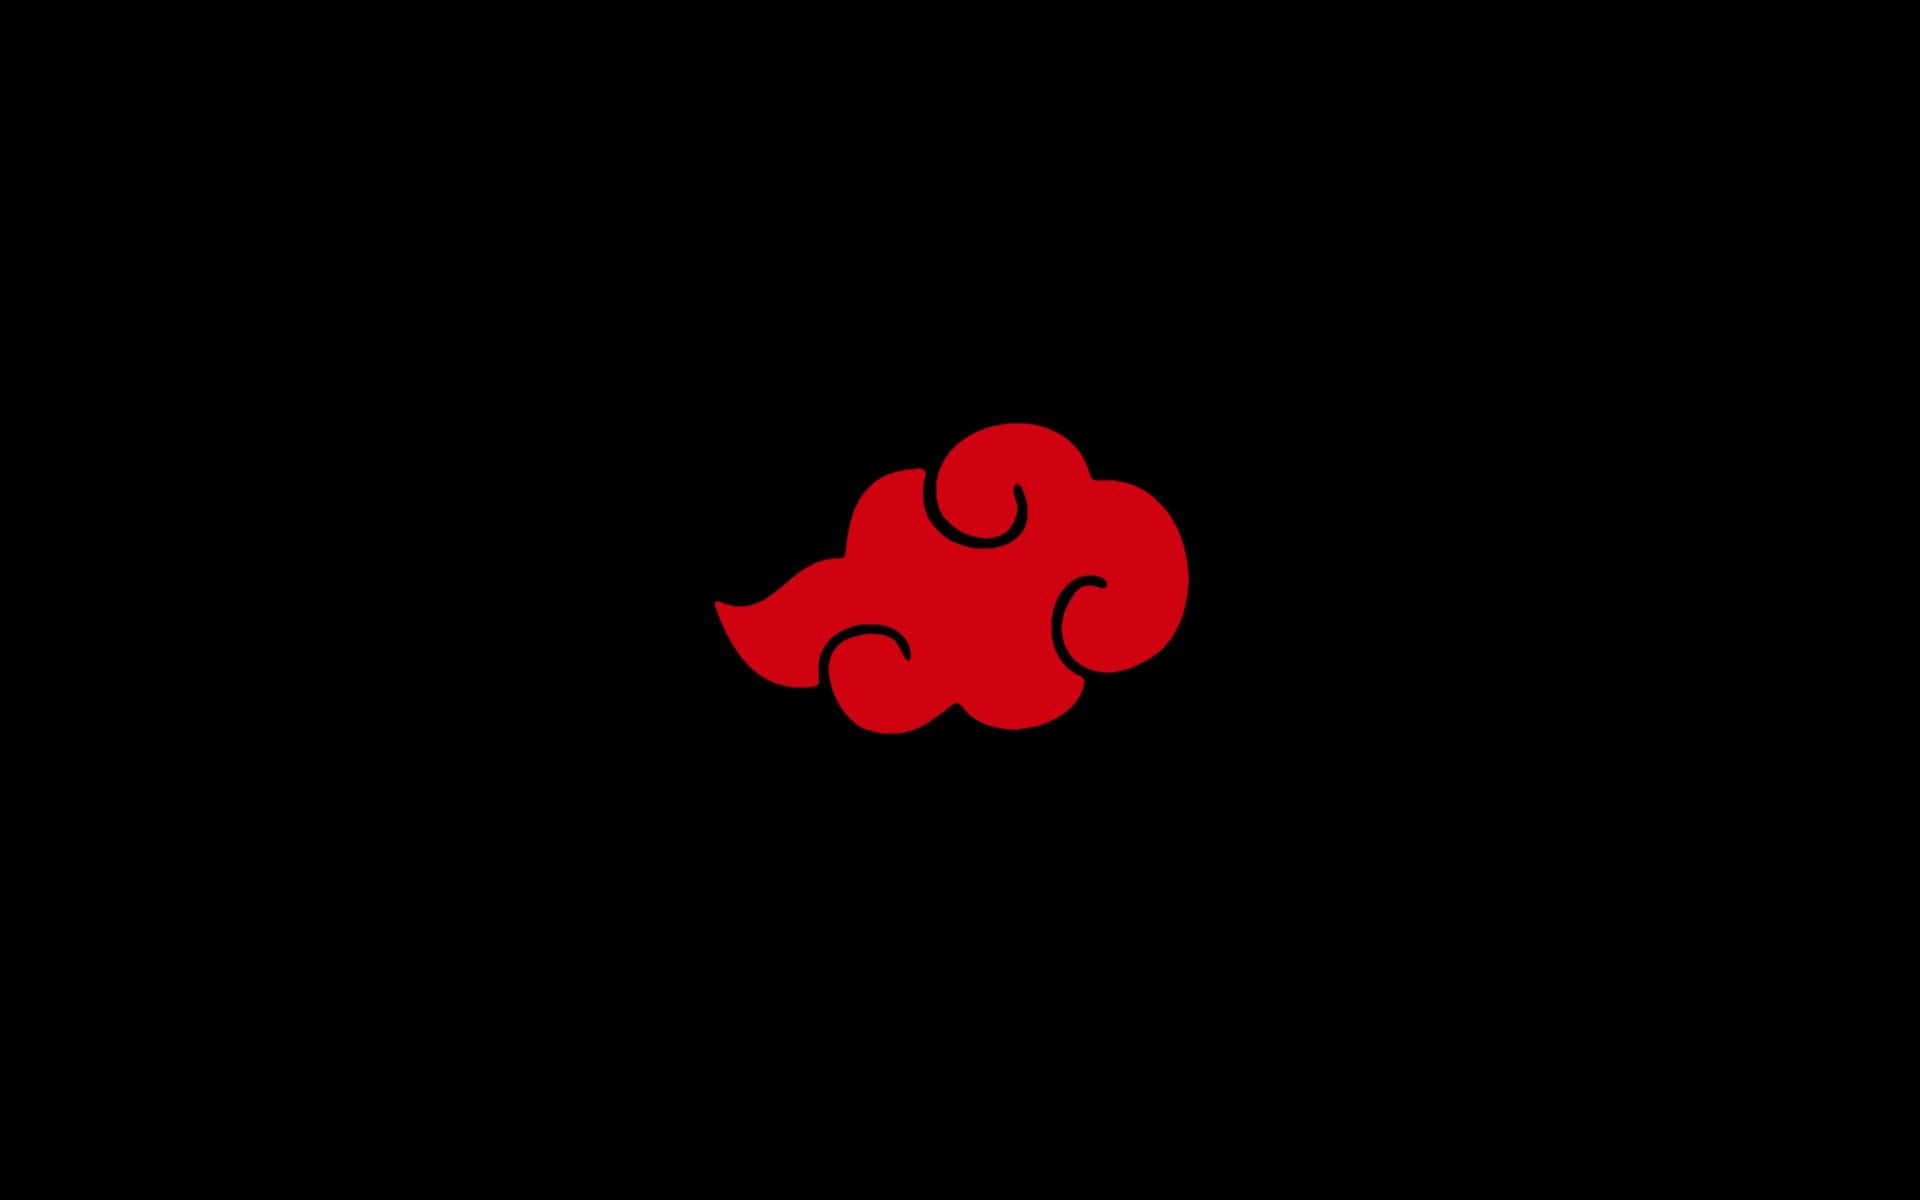 The akatsuki symbol - a powerful emblem of mystery and power" Wallpaper